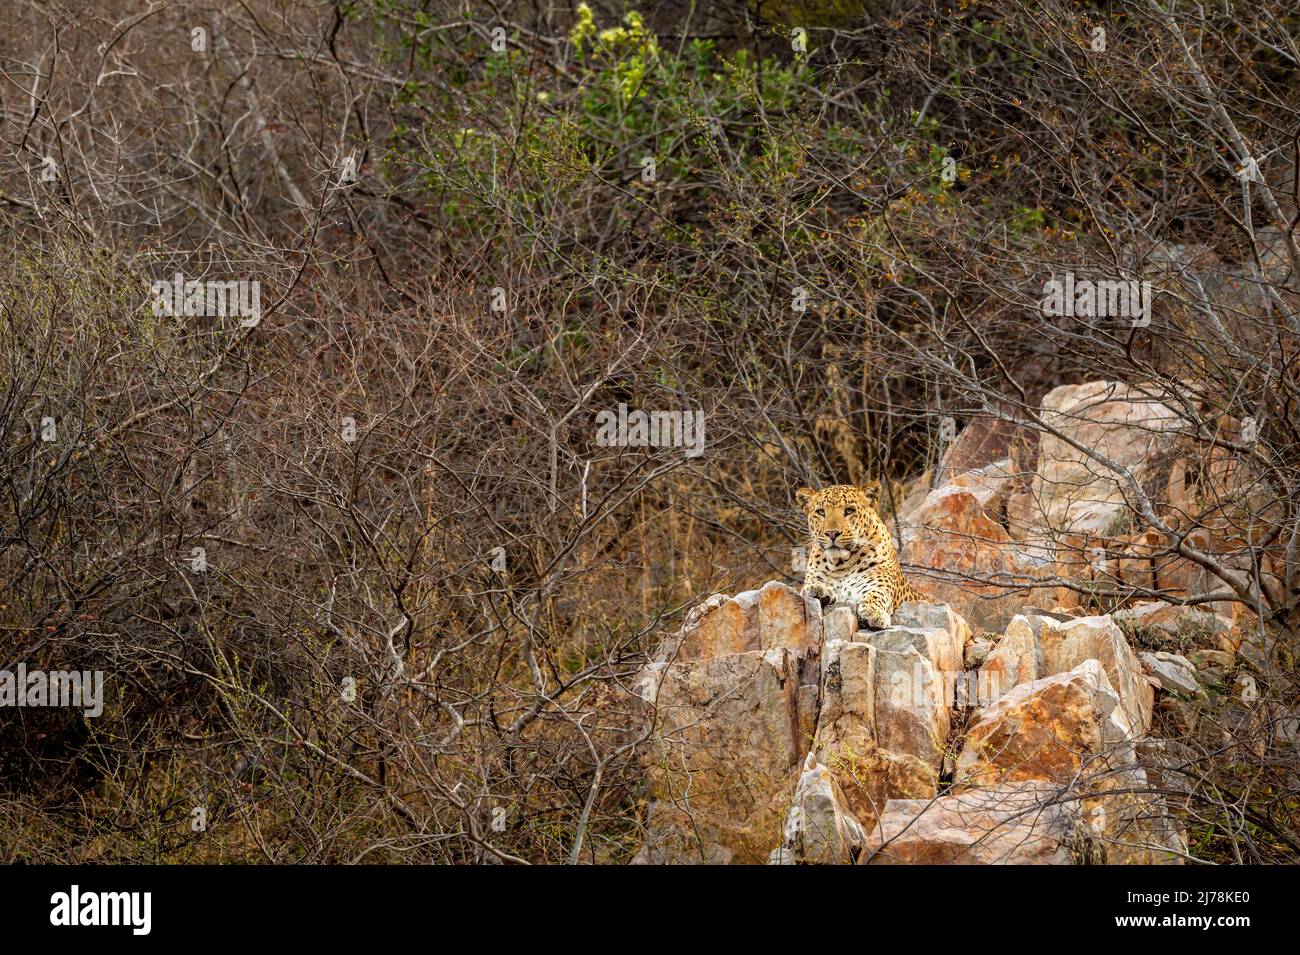 indian wild male leopard or panther resting on rock and high on hills or mountain rocks at outdoor jungle wildlife safari at forest of rajasthan india Stock Photo